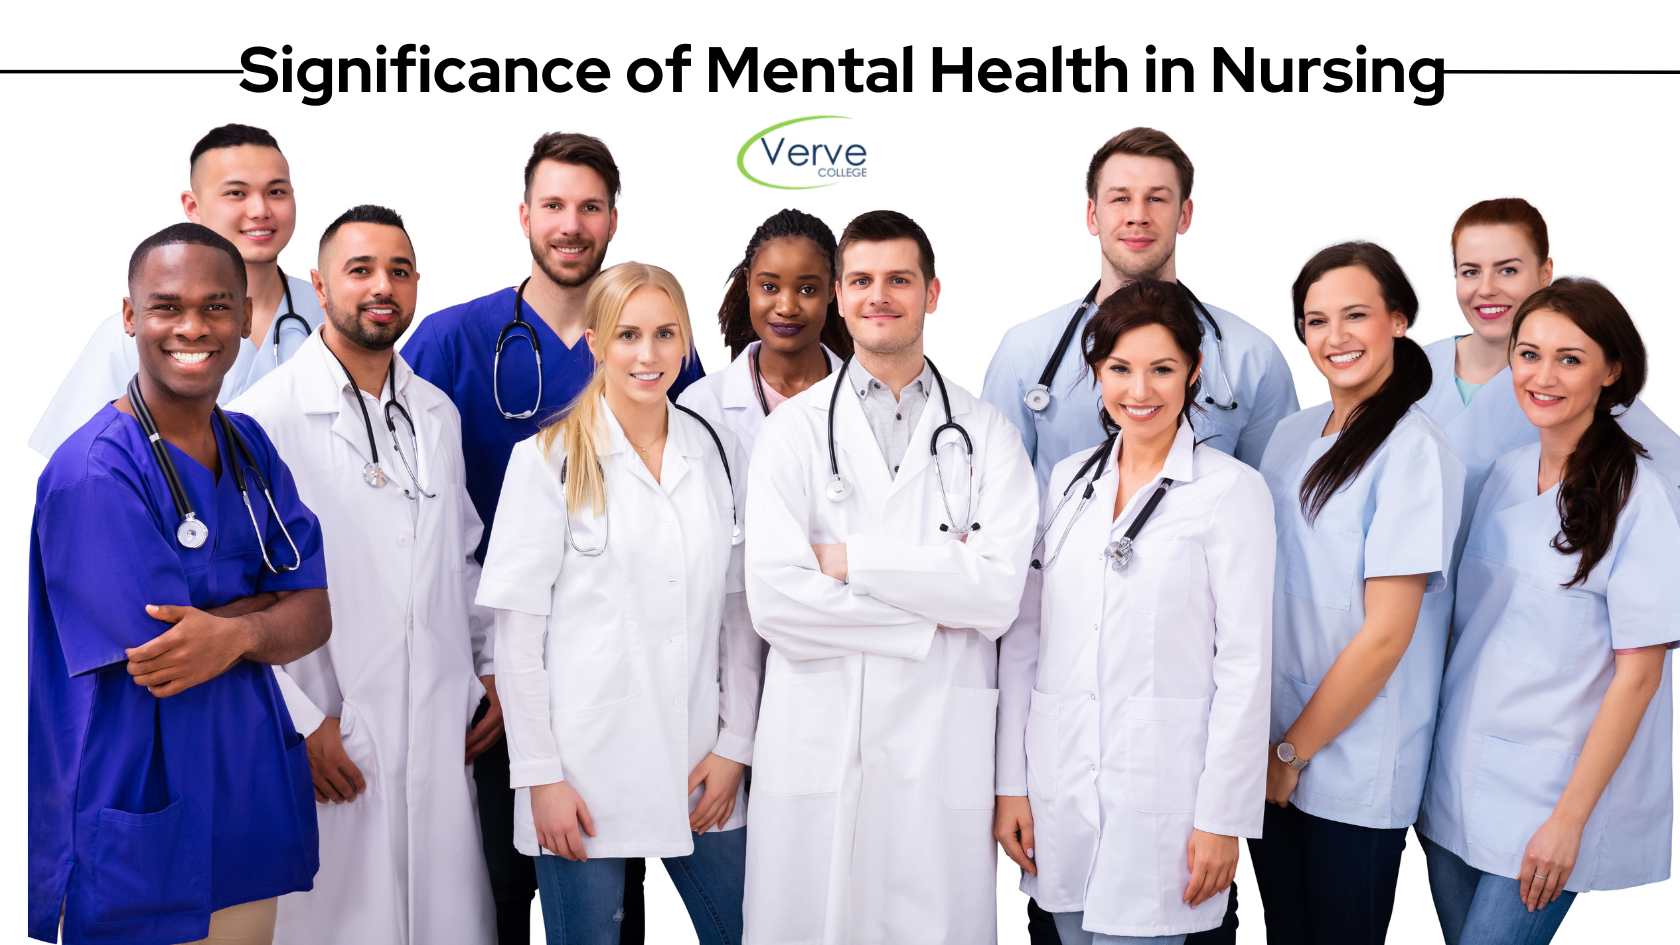 What Are the Significance of Mental Health in Nursing?